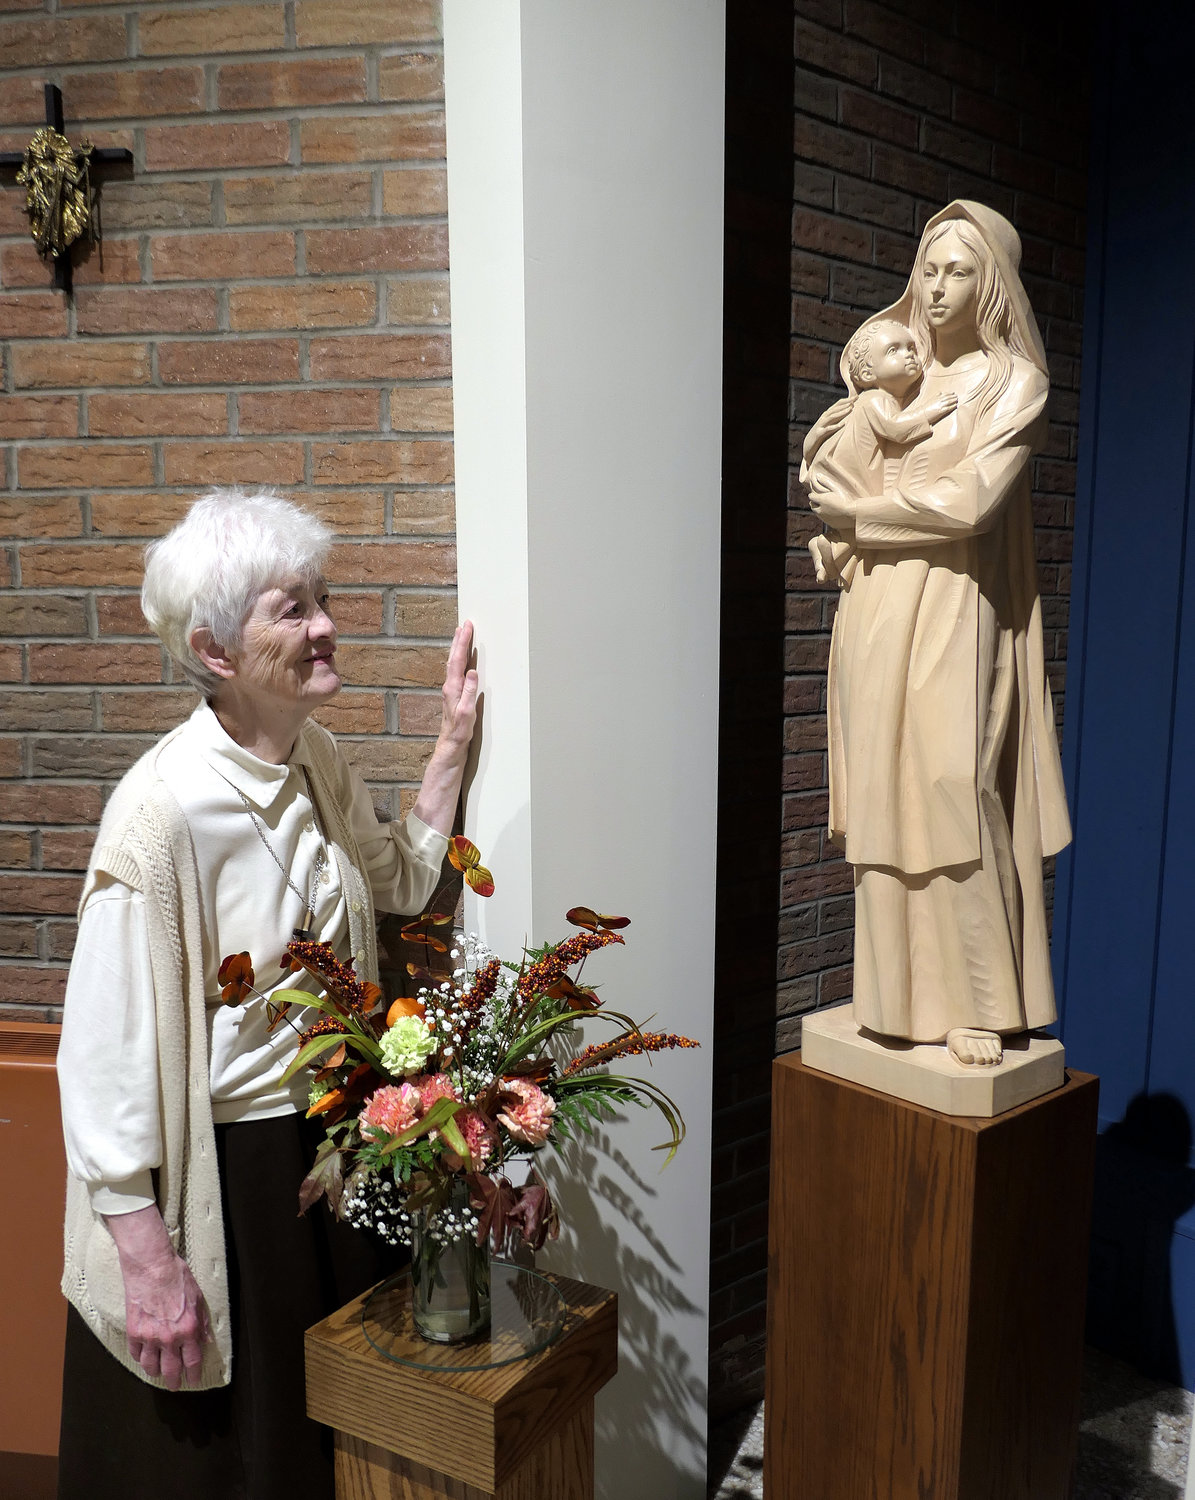 Sister Michaelene Devine, O.C.D., prioress, contemplates before a statue of Our Lady of Mount Carmel inside the chapel. This year the nuns are celebrating the 100th anniversary of the arrival of their order in the Archdiocese of New York.